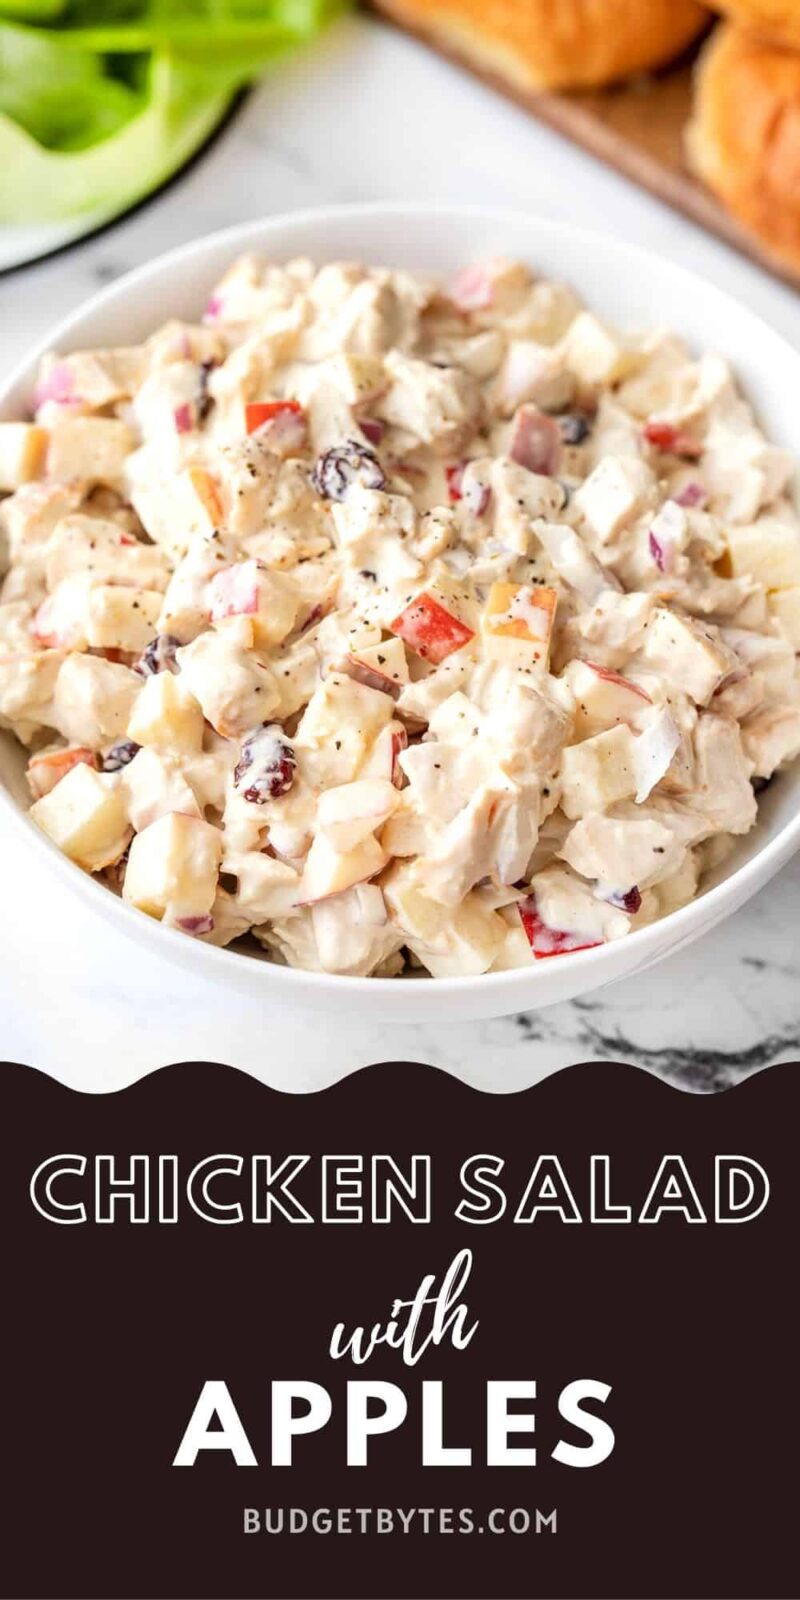 A bowl of chicken salad with apples, title text at the bottom